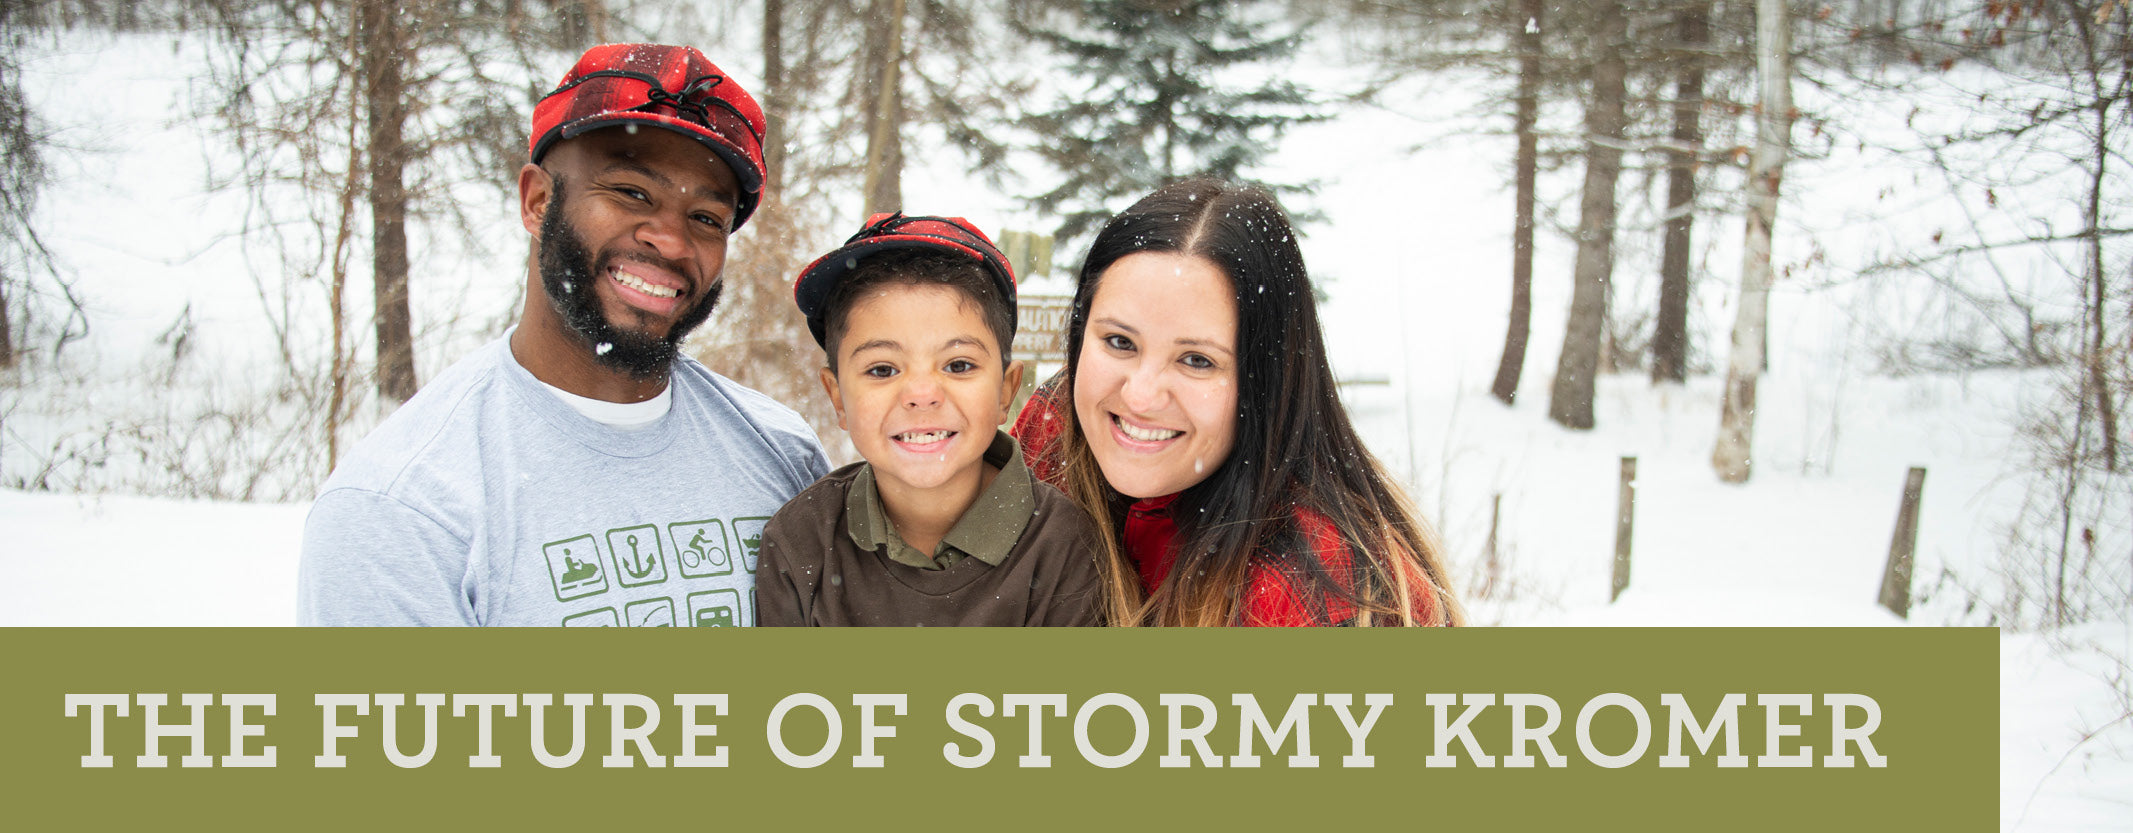 Title: The Future of Stormy Kromer